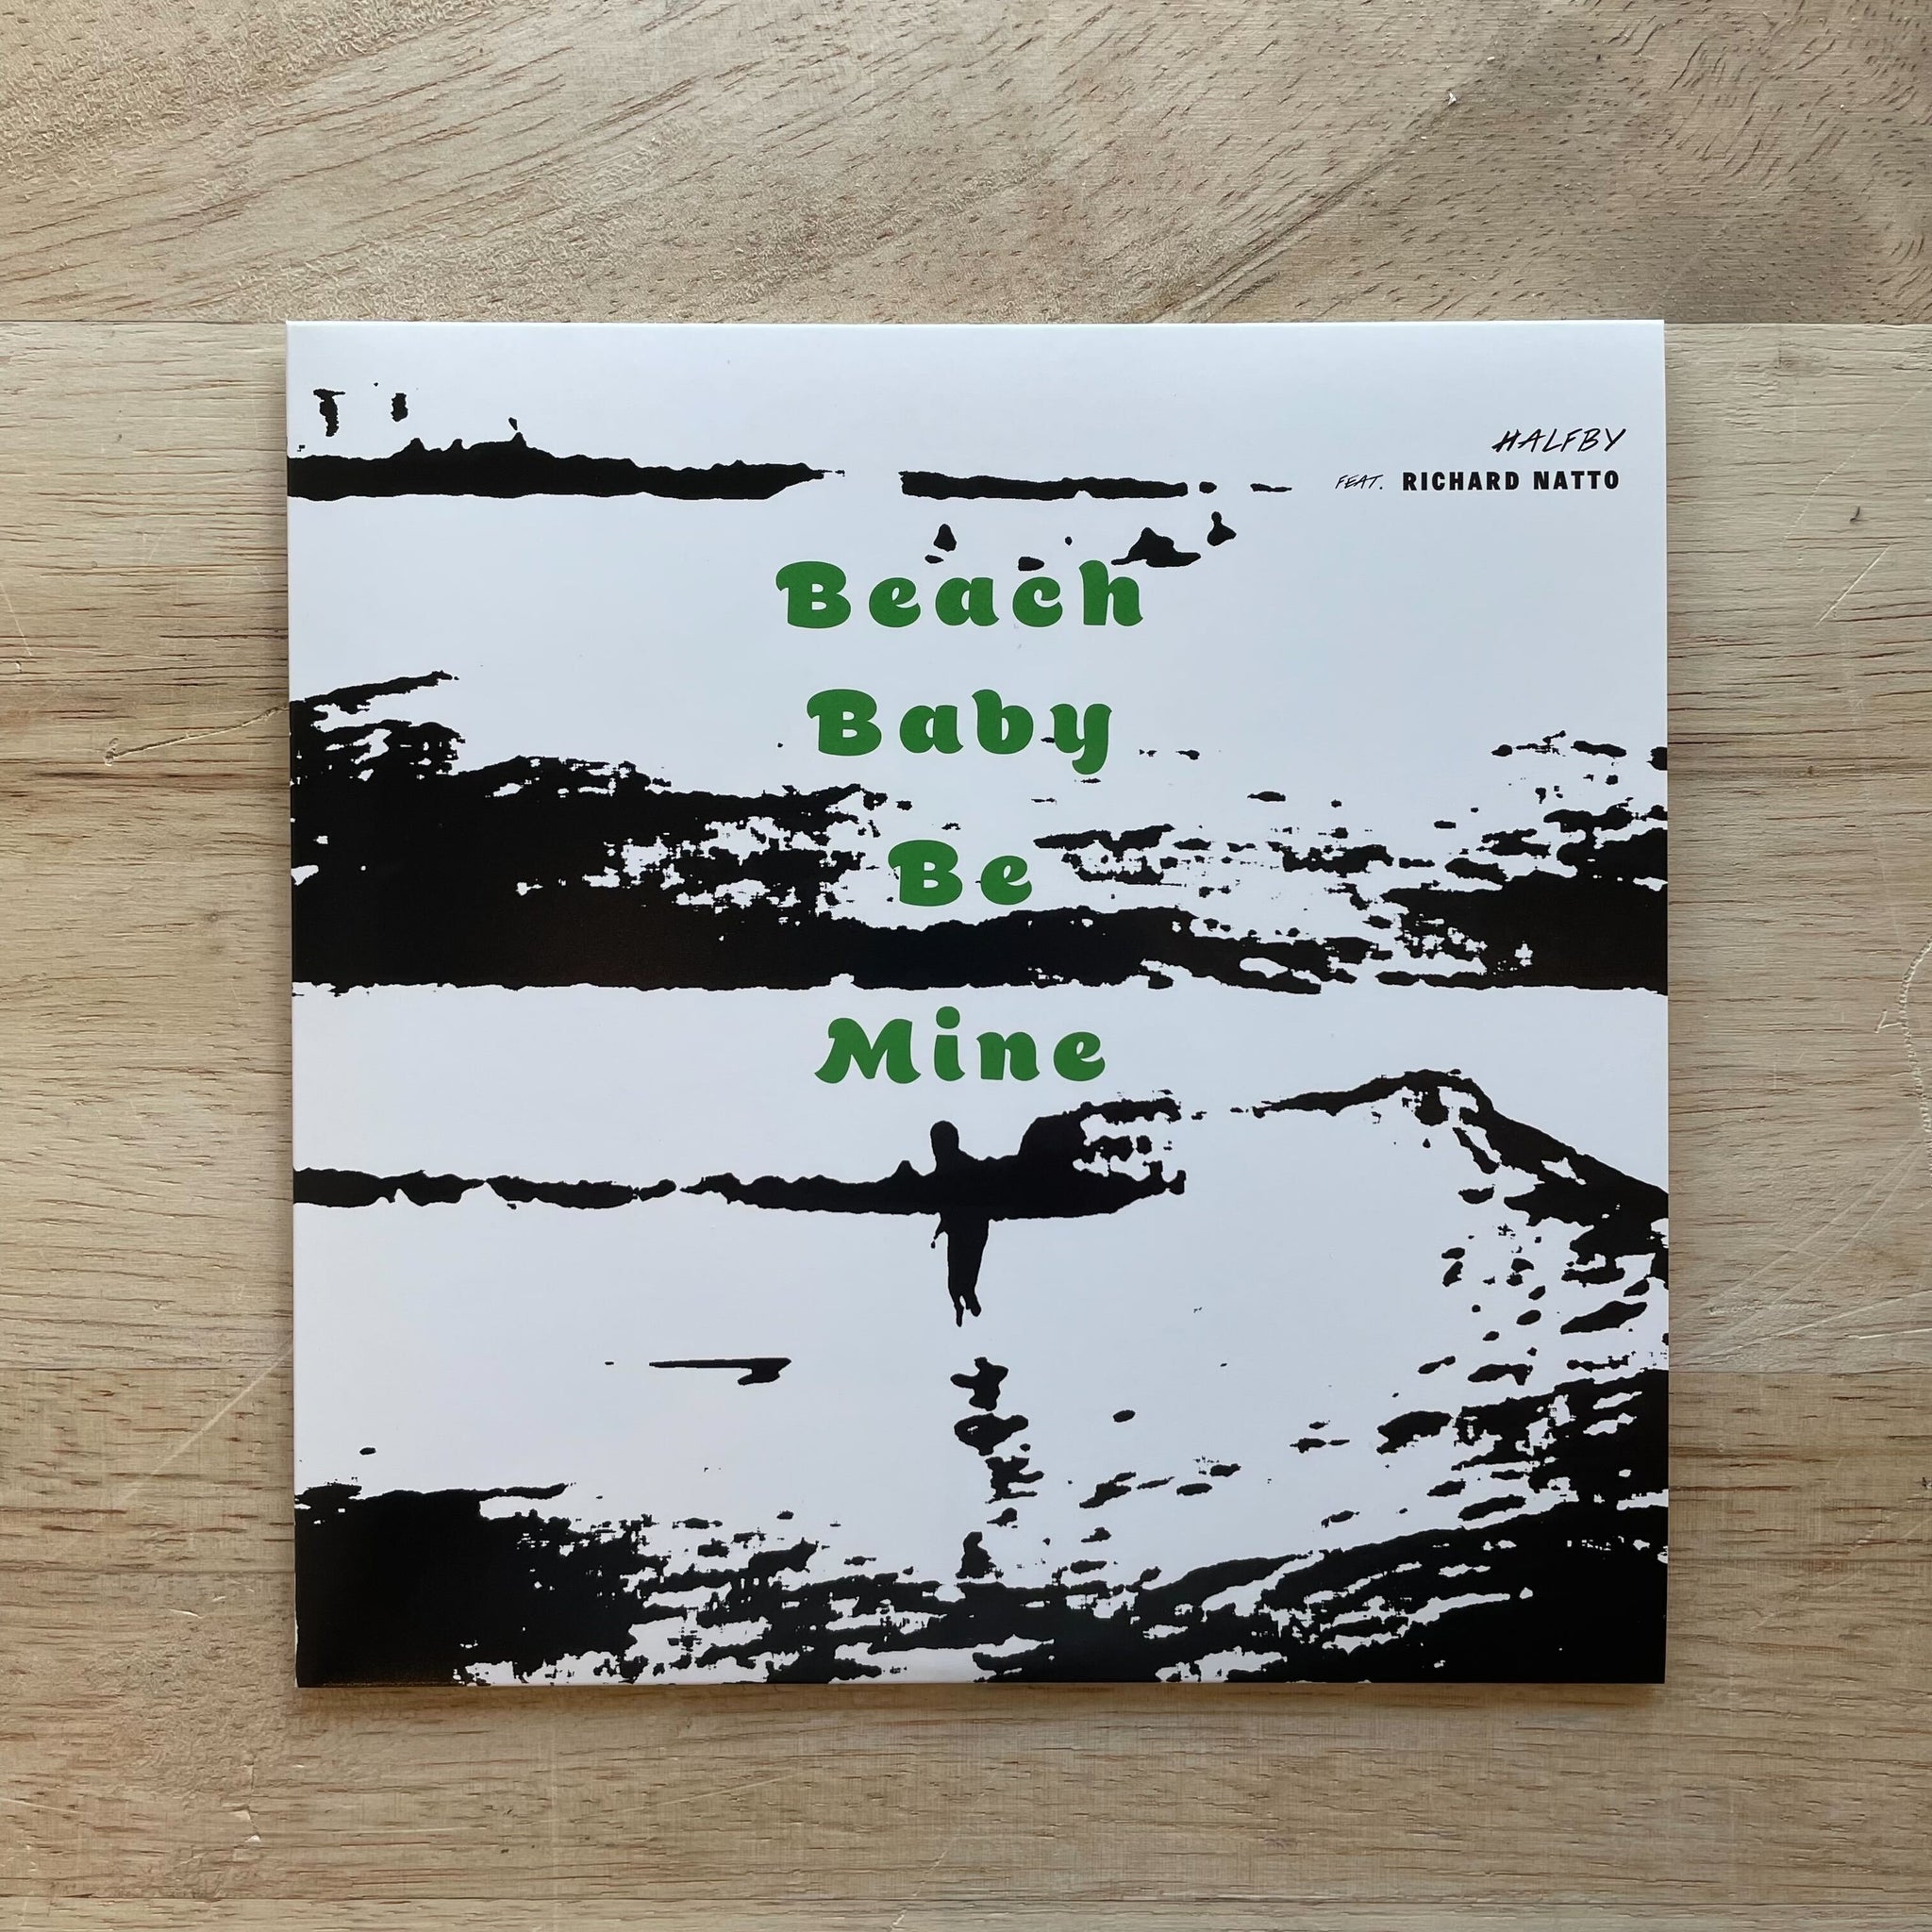 Halfby - Beach Baby Be Mine feat. Richard Natto / Remix by Roger Bong (EMF-104)